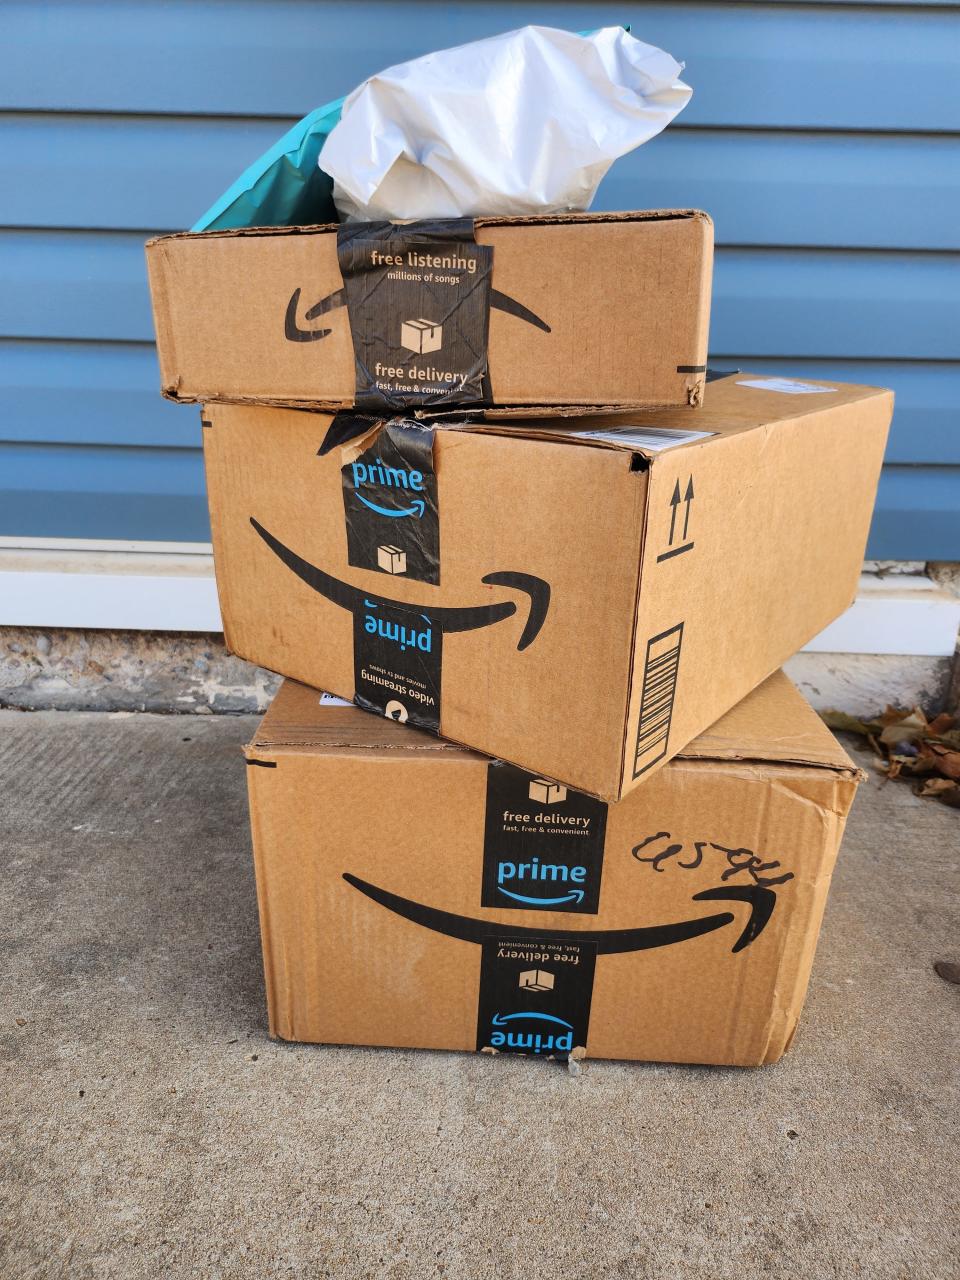 The FTC in June sued Amazon, alleging it duped consumers into enrolling in Prime using “manipulative, coercive or deceptive” tactics known as “dark patterns” and then made it “knowingly complicated” to cancel.